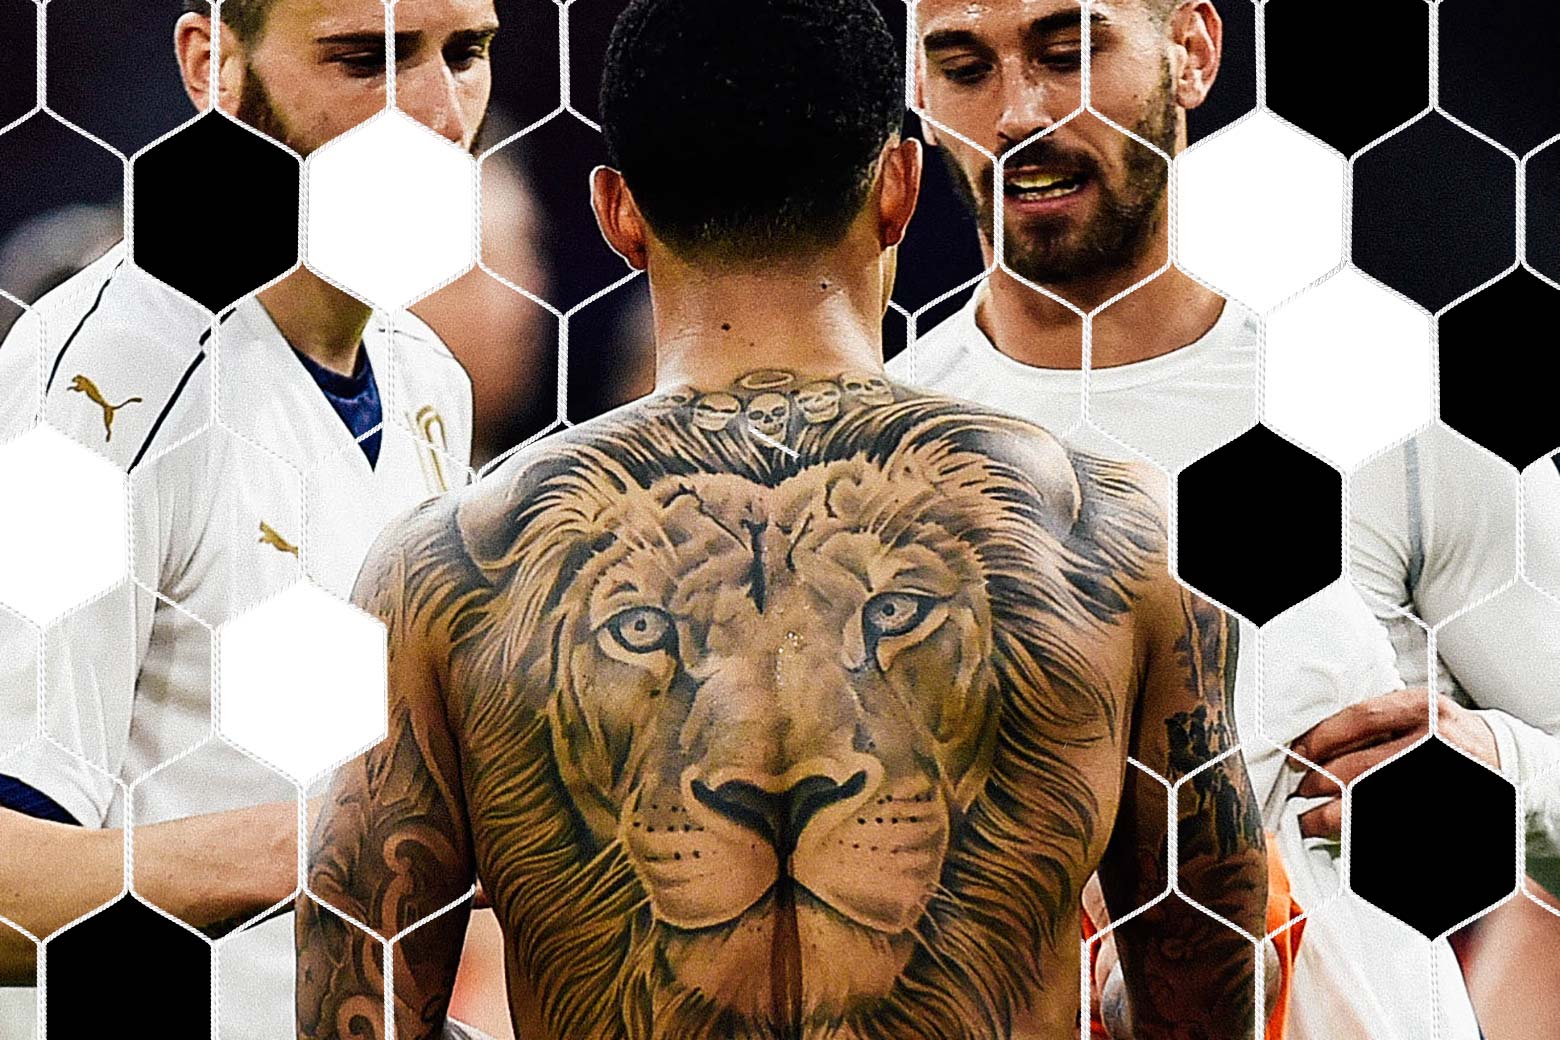 A large tattoo of a lion is seen on Memphis Depay’s back.